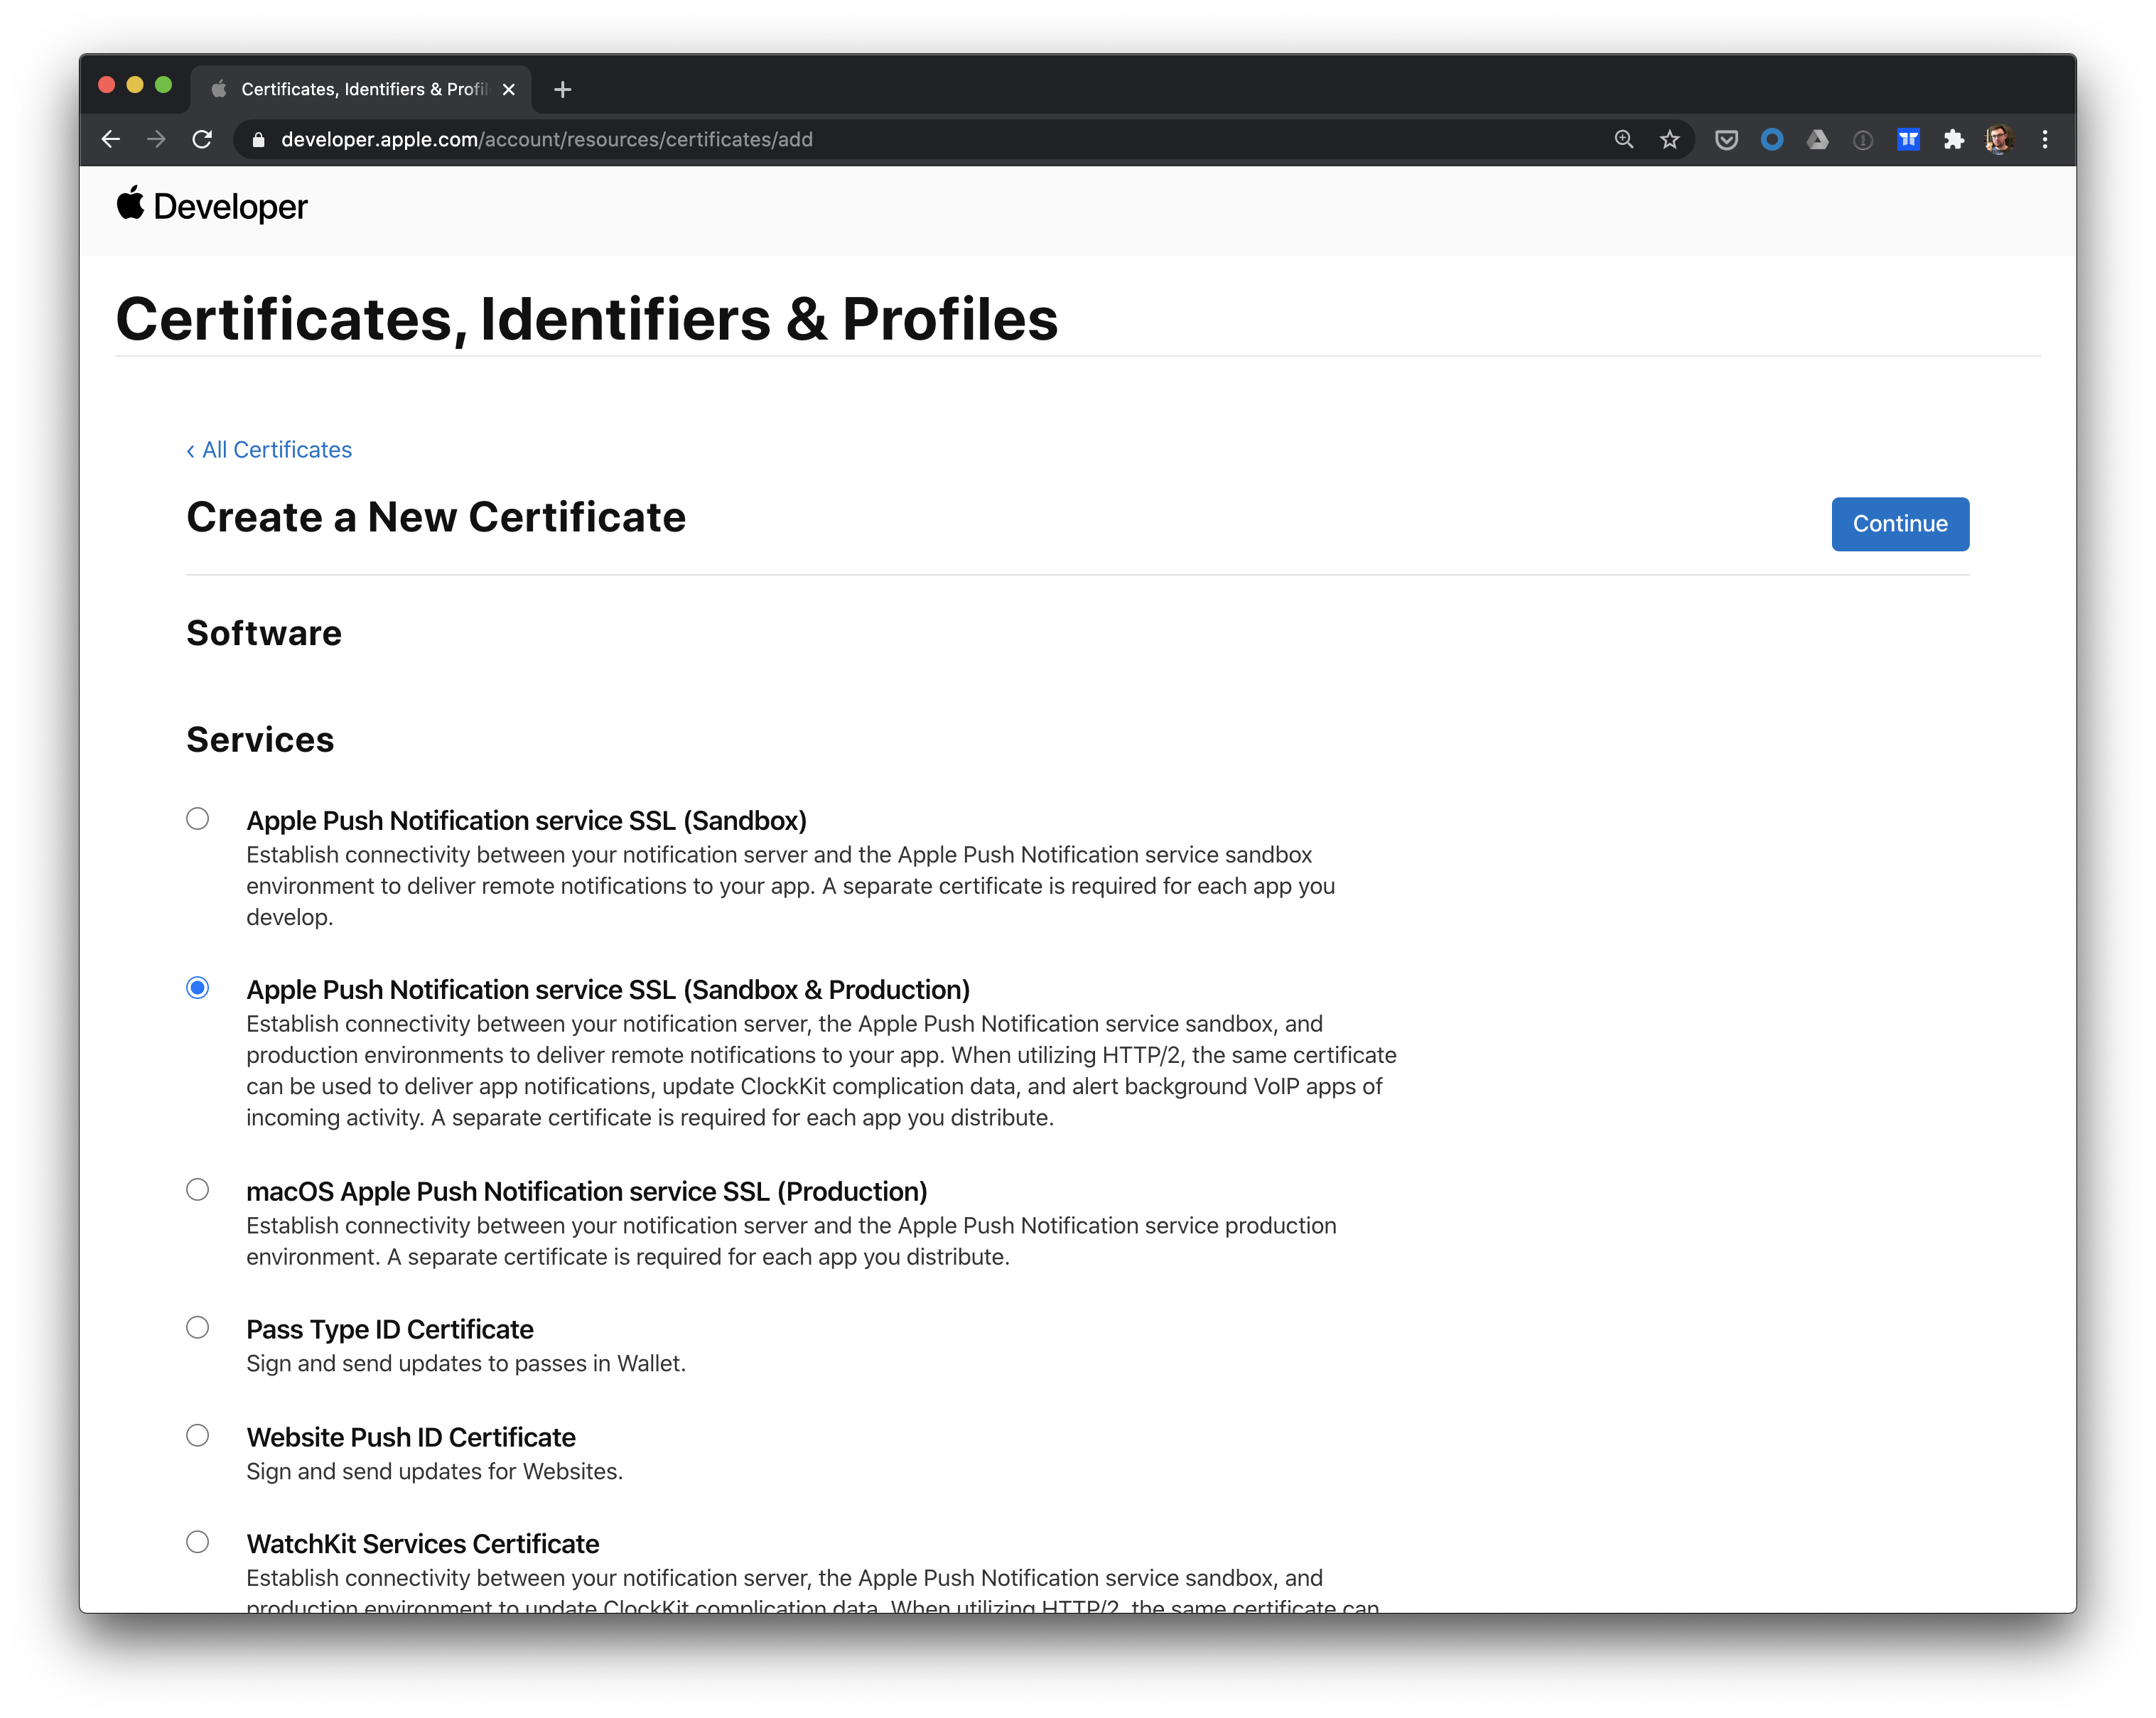 Create a certificate for the Apple Push Notification service SSL (Sandbox & Production).